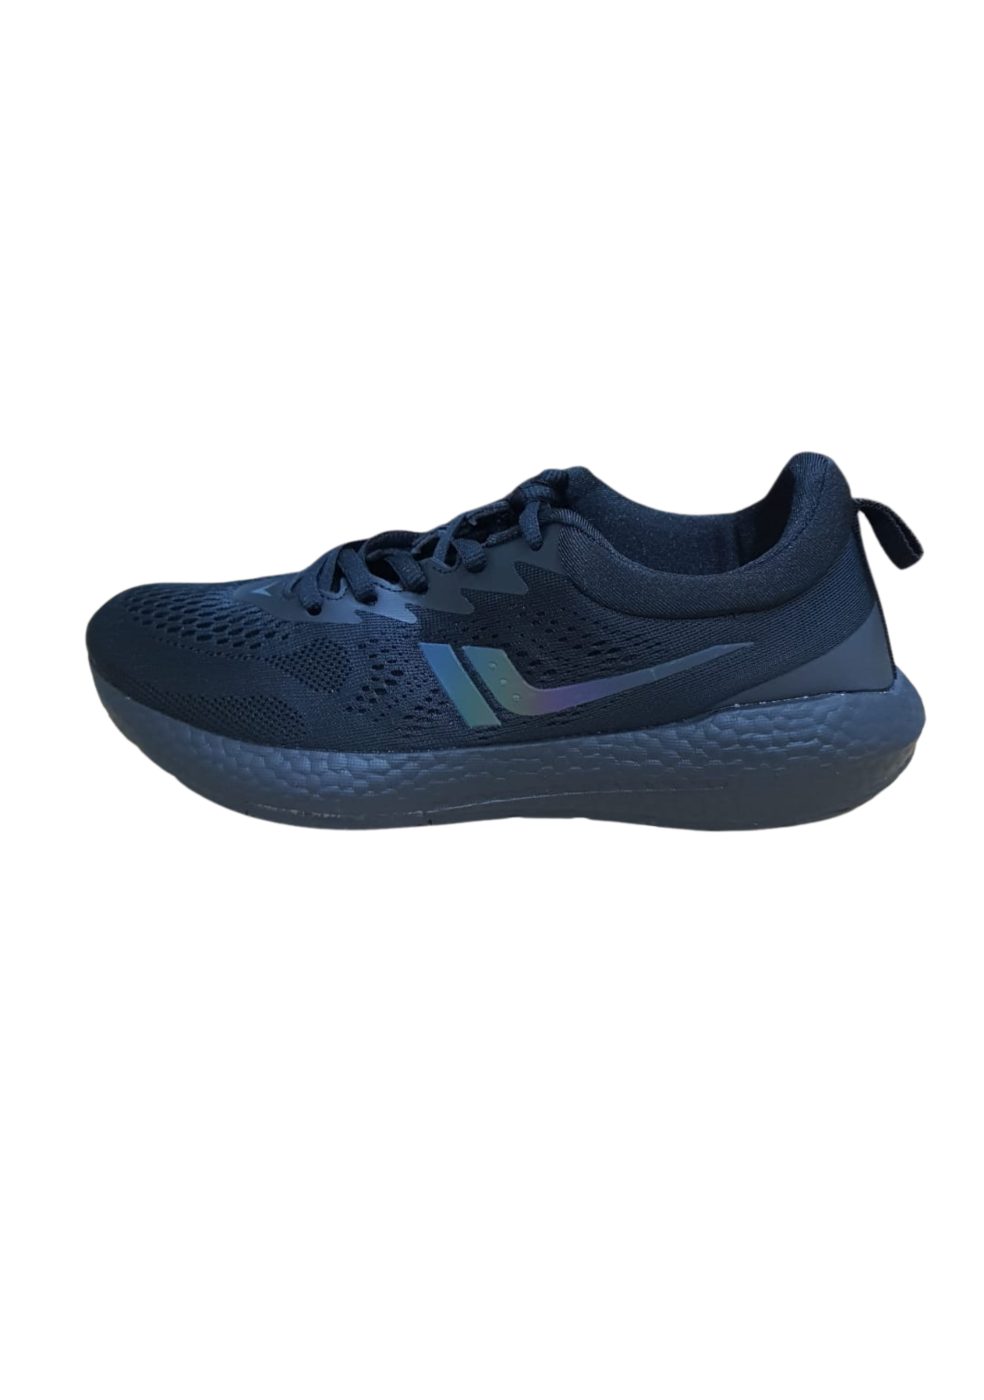 CLT Stylish Sports Shoes For Men